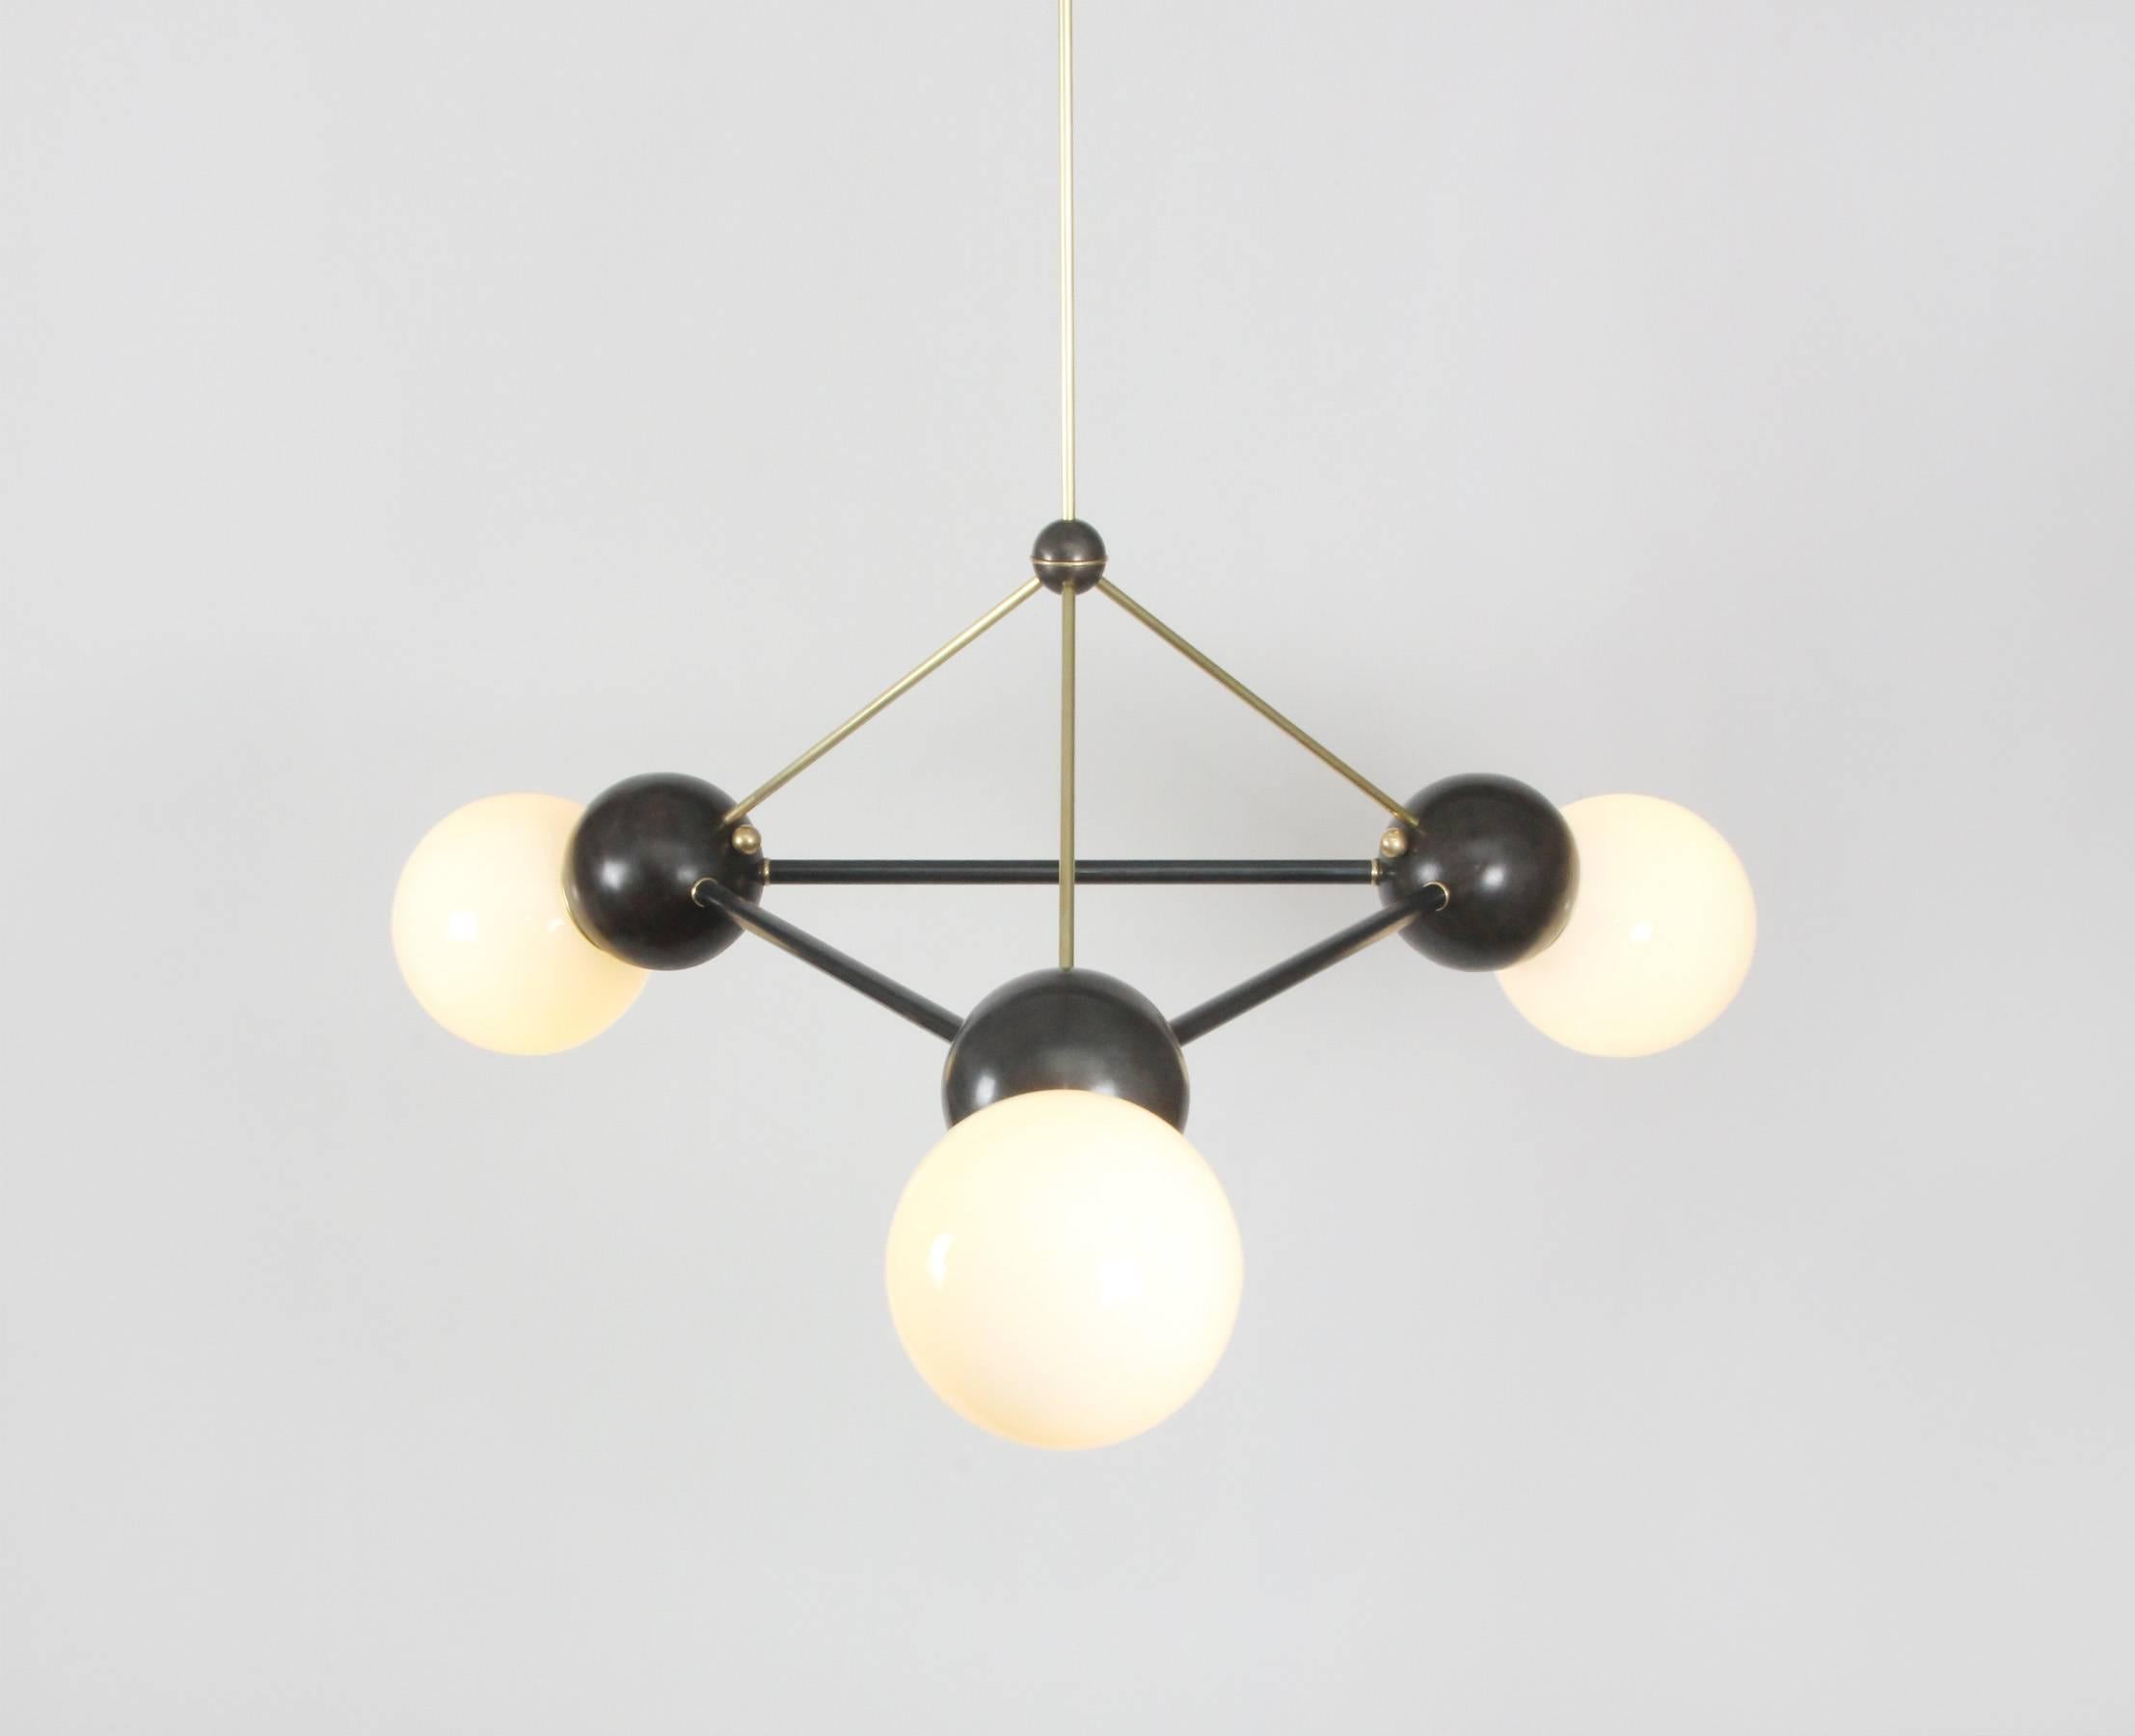 Buoyant, oversized space frame chandelier featuring a combination of brushed brass and oil-rubbed bronze metal finishes with 8-inch milk glass globes and LED illumination. This is a unique item produced in New York by an artist atelier; it was